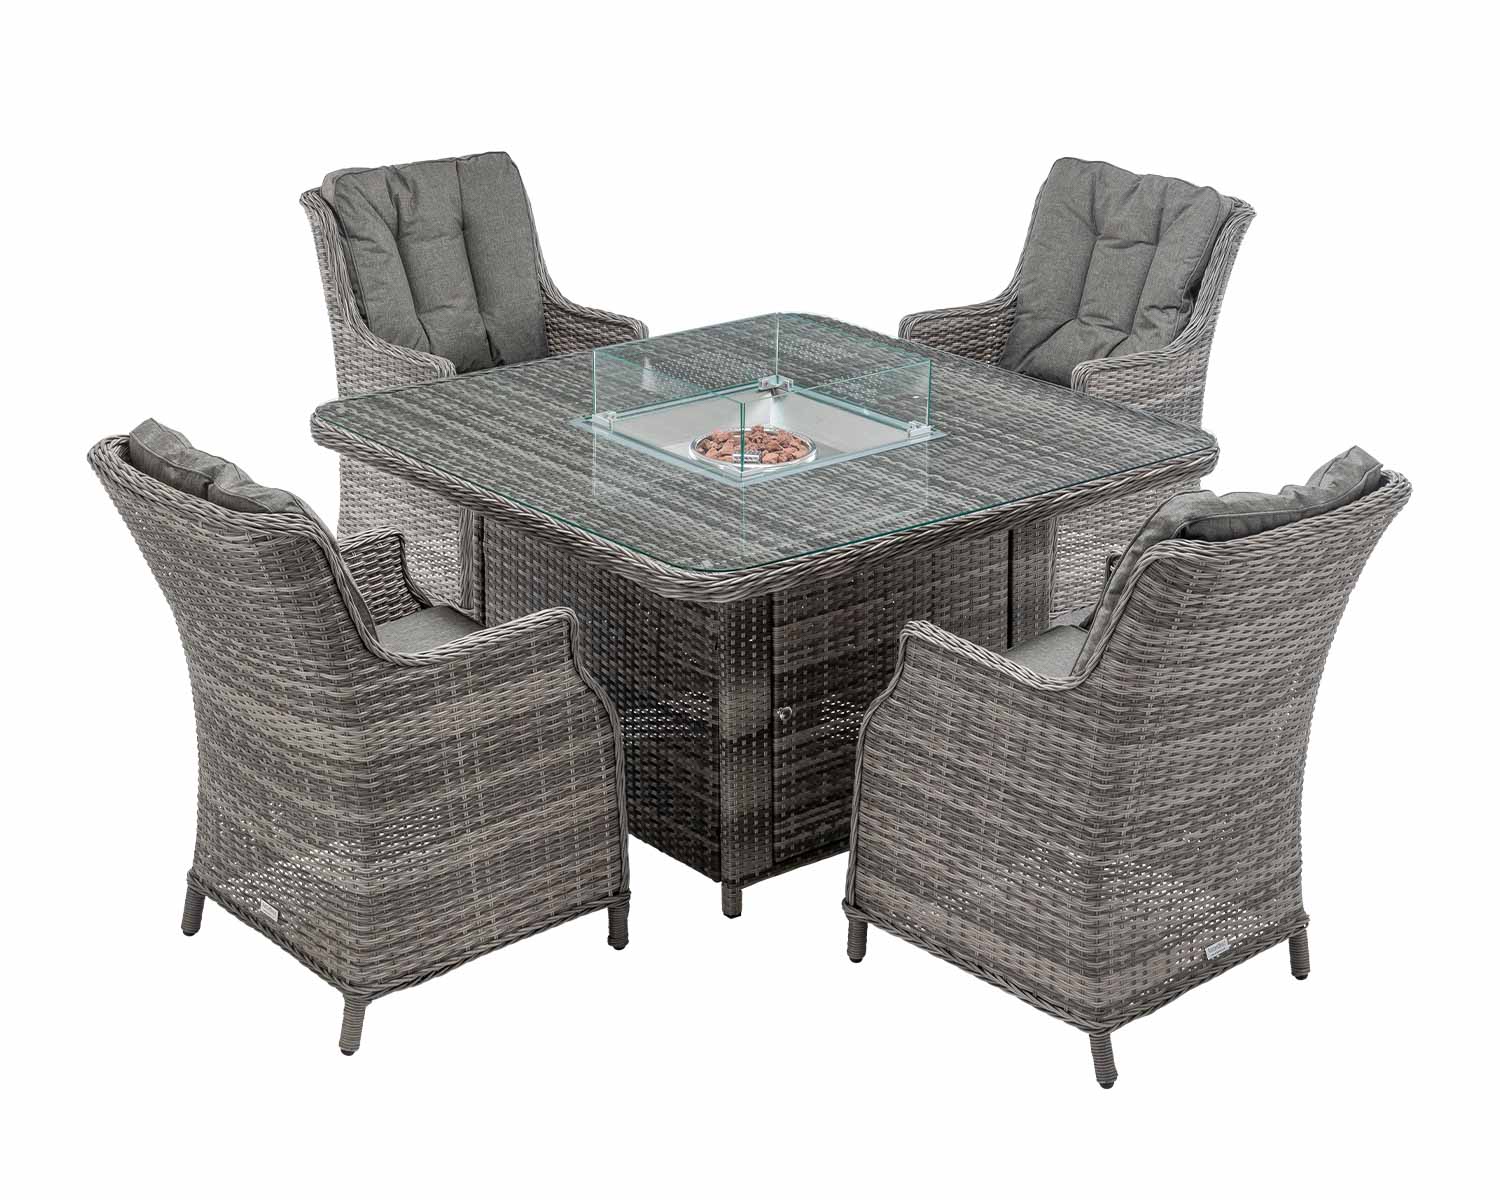 4 Seat Rattan Garden Dining Set With Square Table In Grey With Fire Pit Riviera Rattan Direct